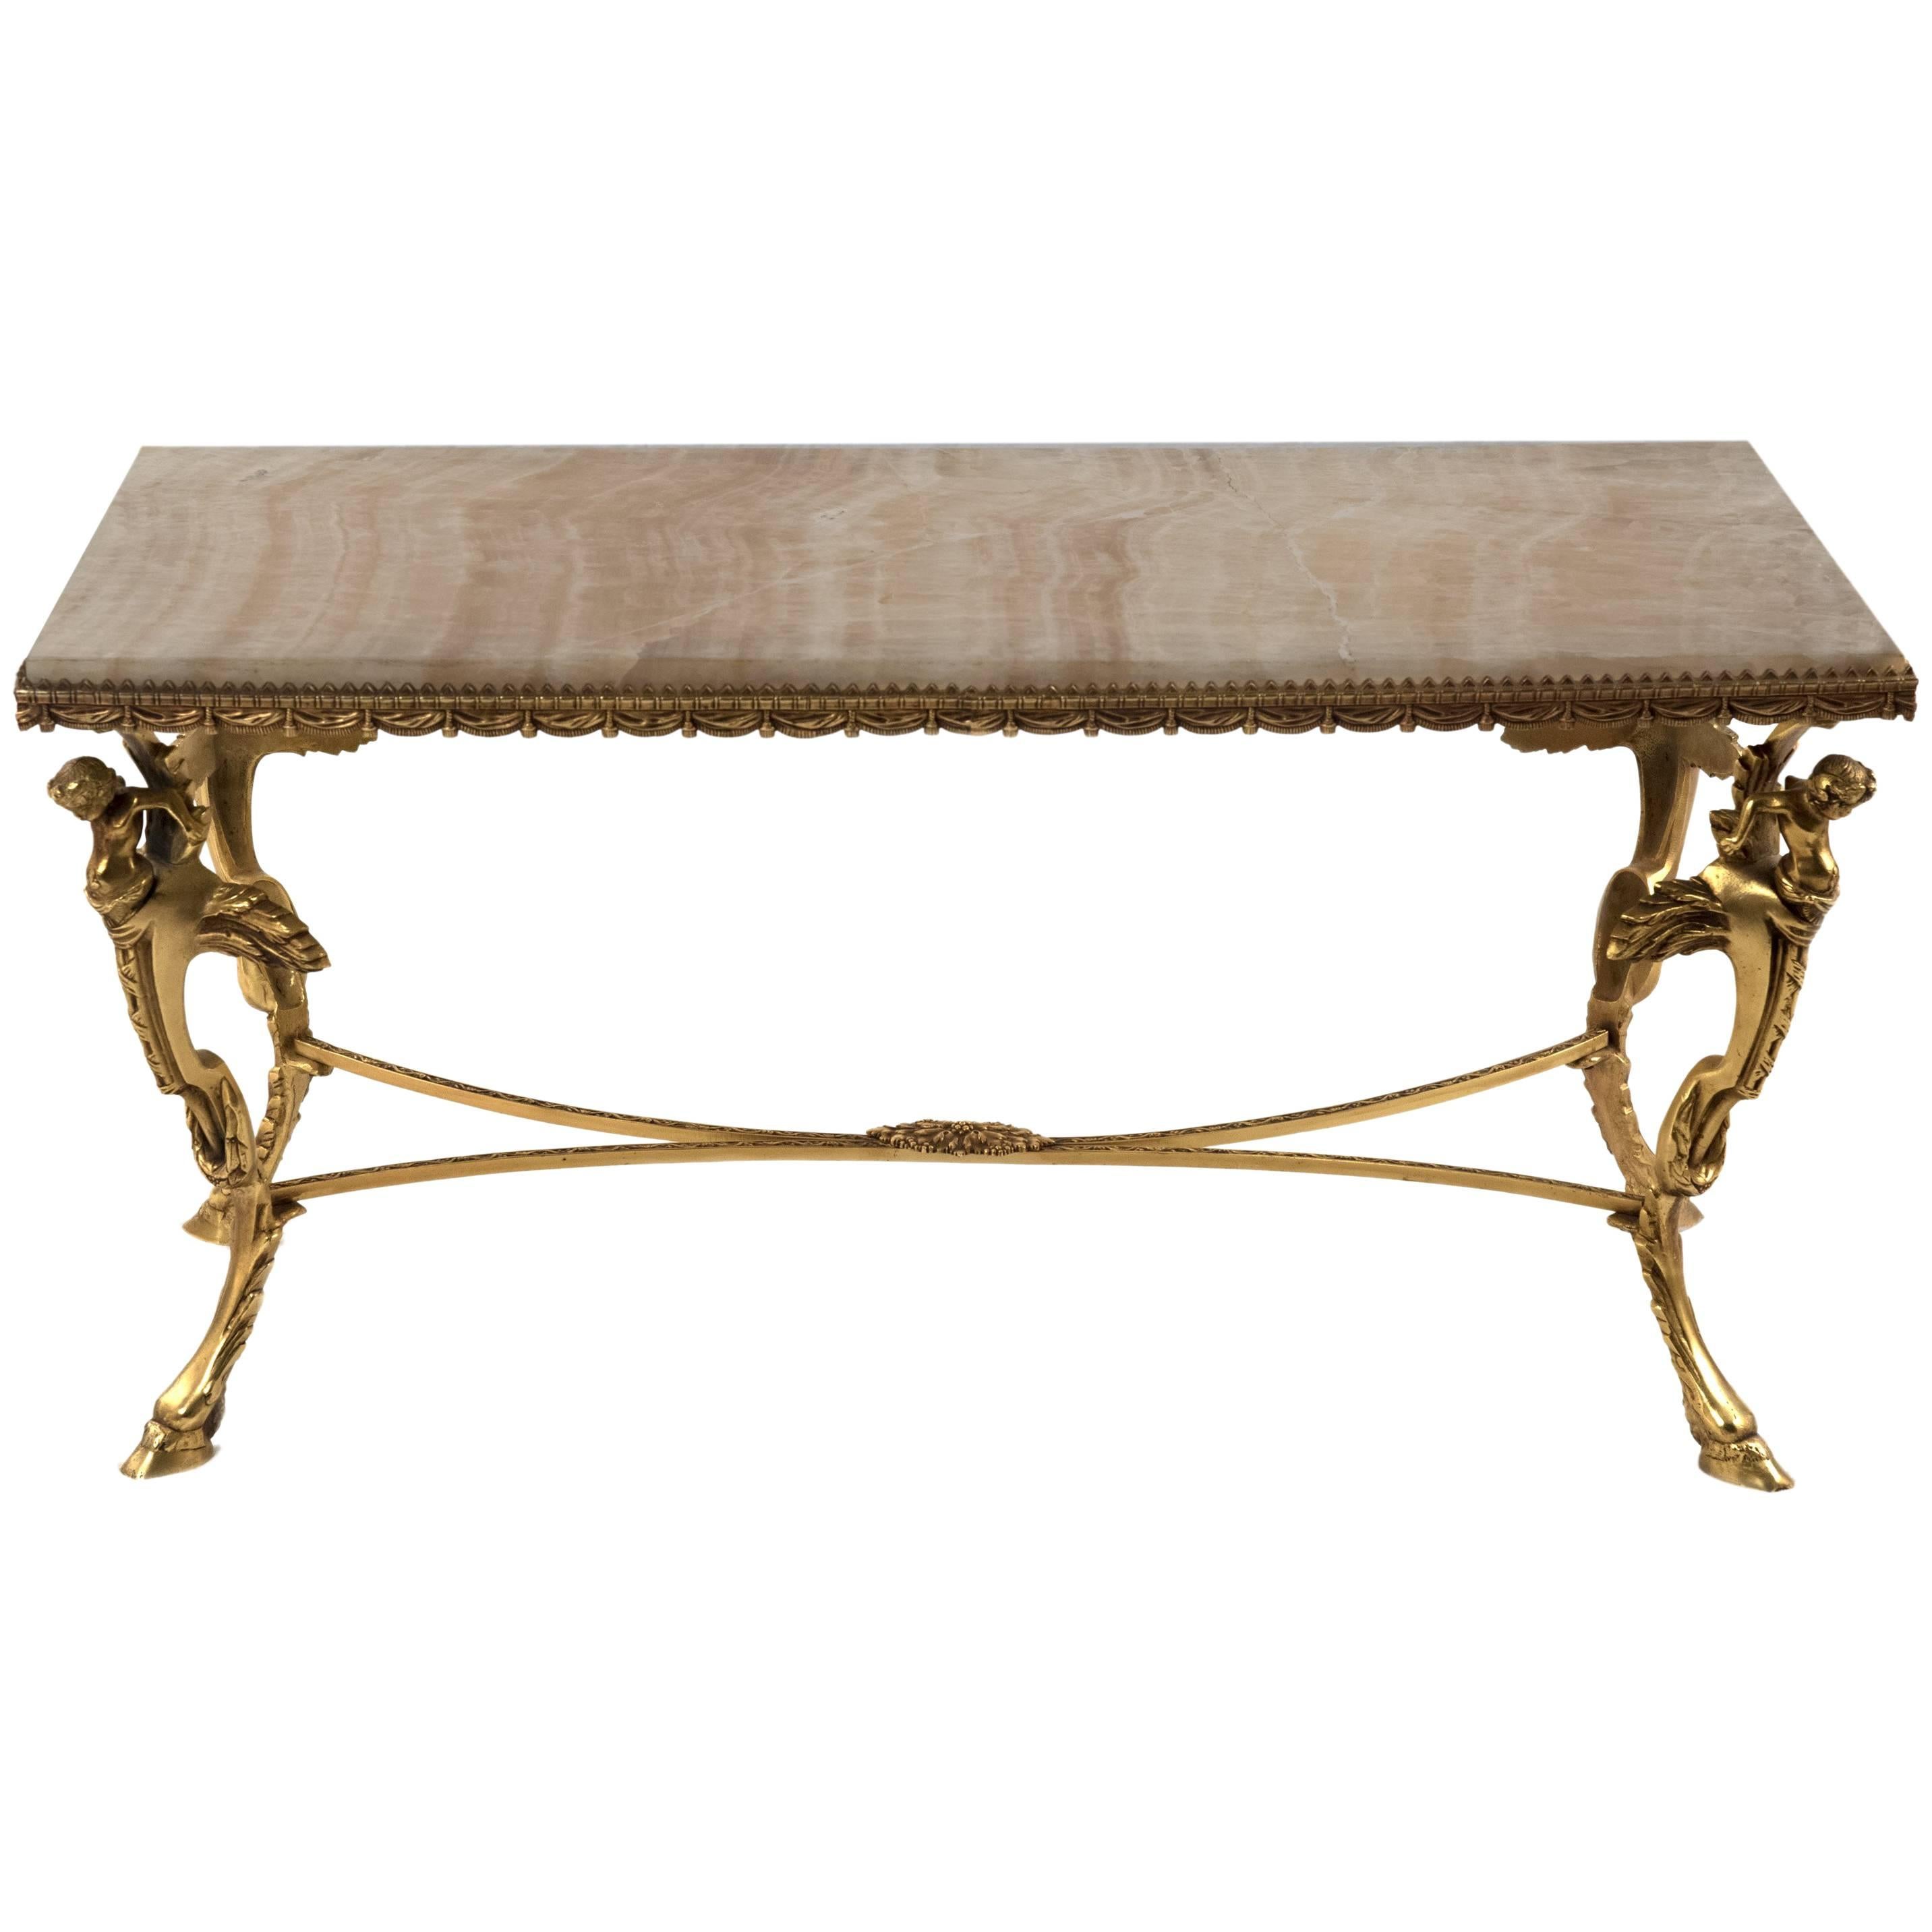 Neoclassical Marble and Gilt Coffee Table